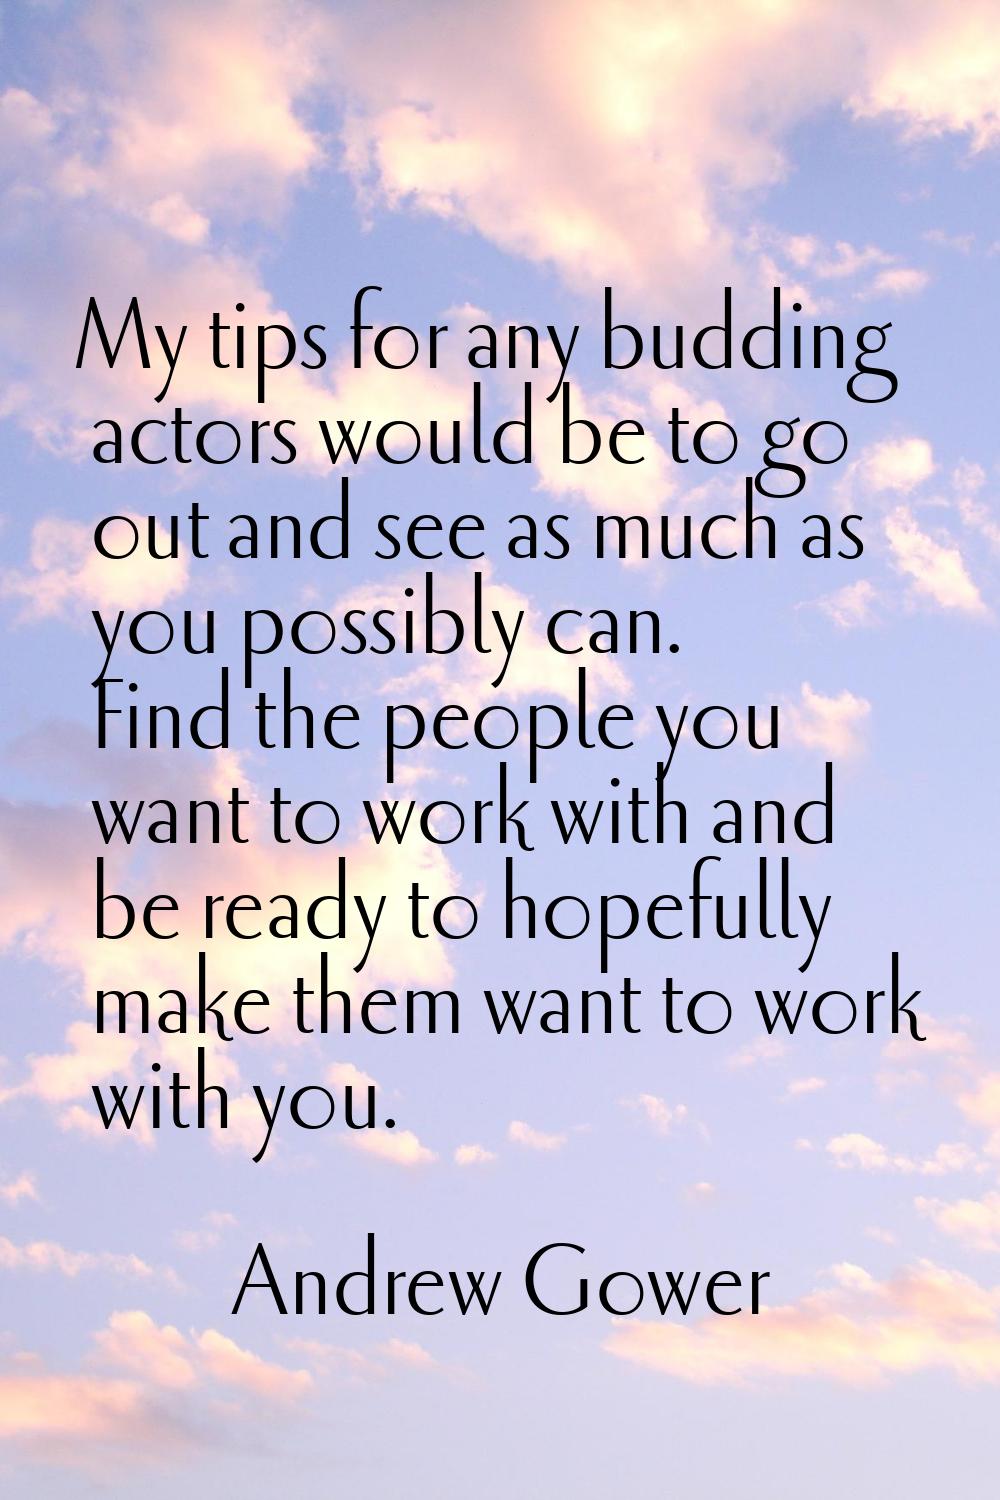 My tips for any budding actors would be to go out and see as much as you possibly can. Find the peo